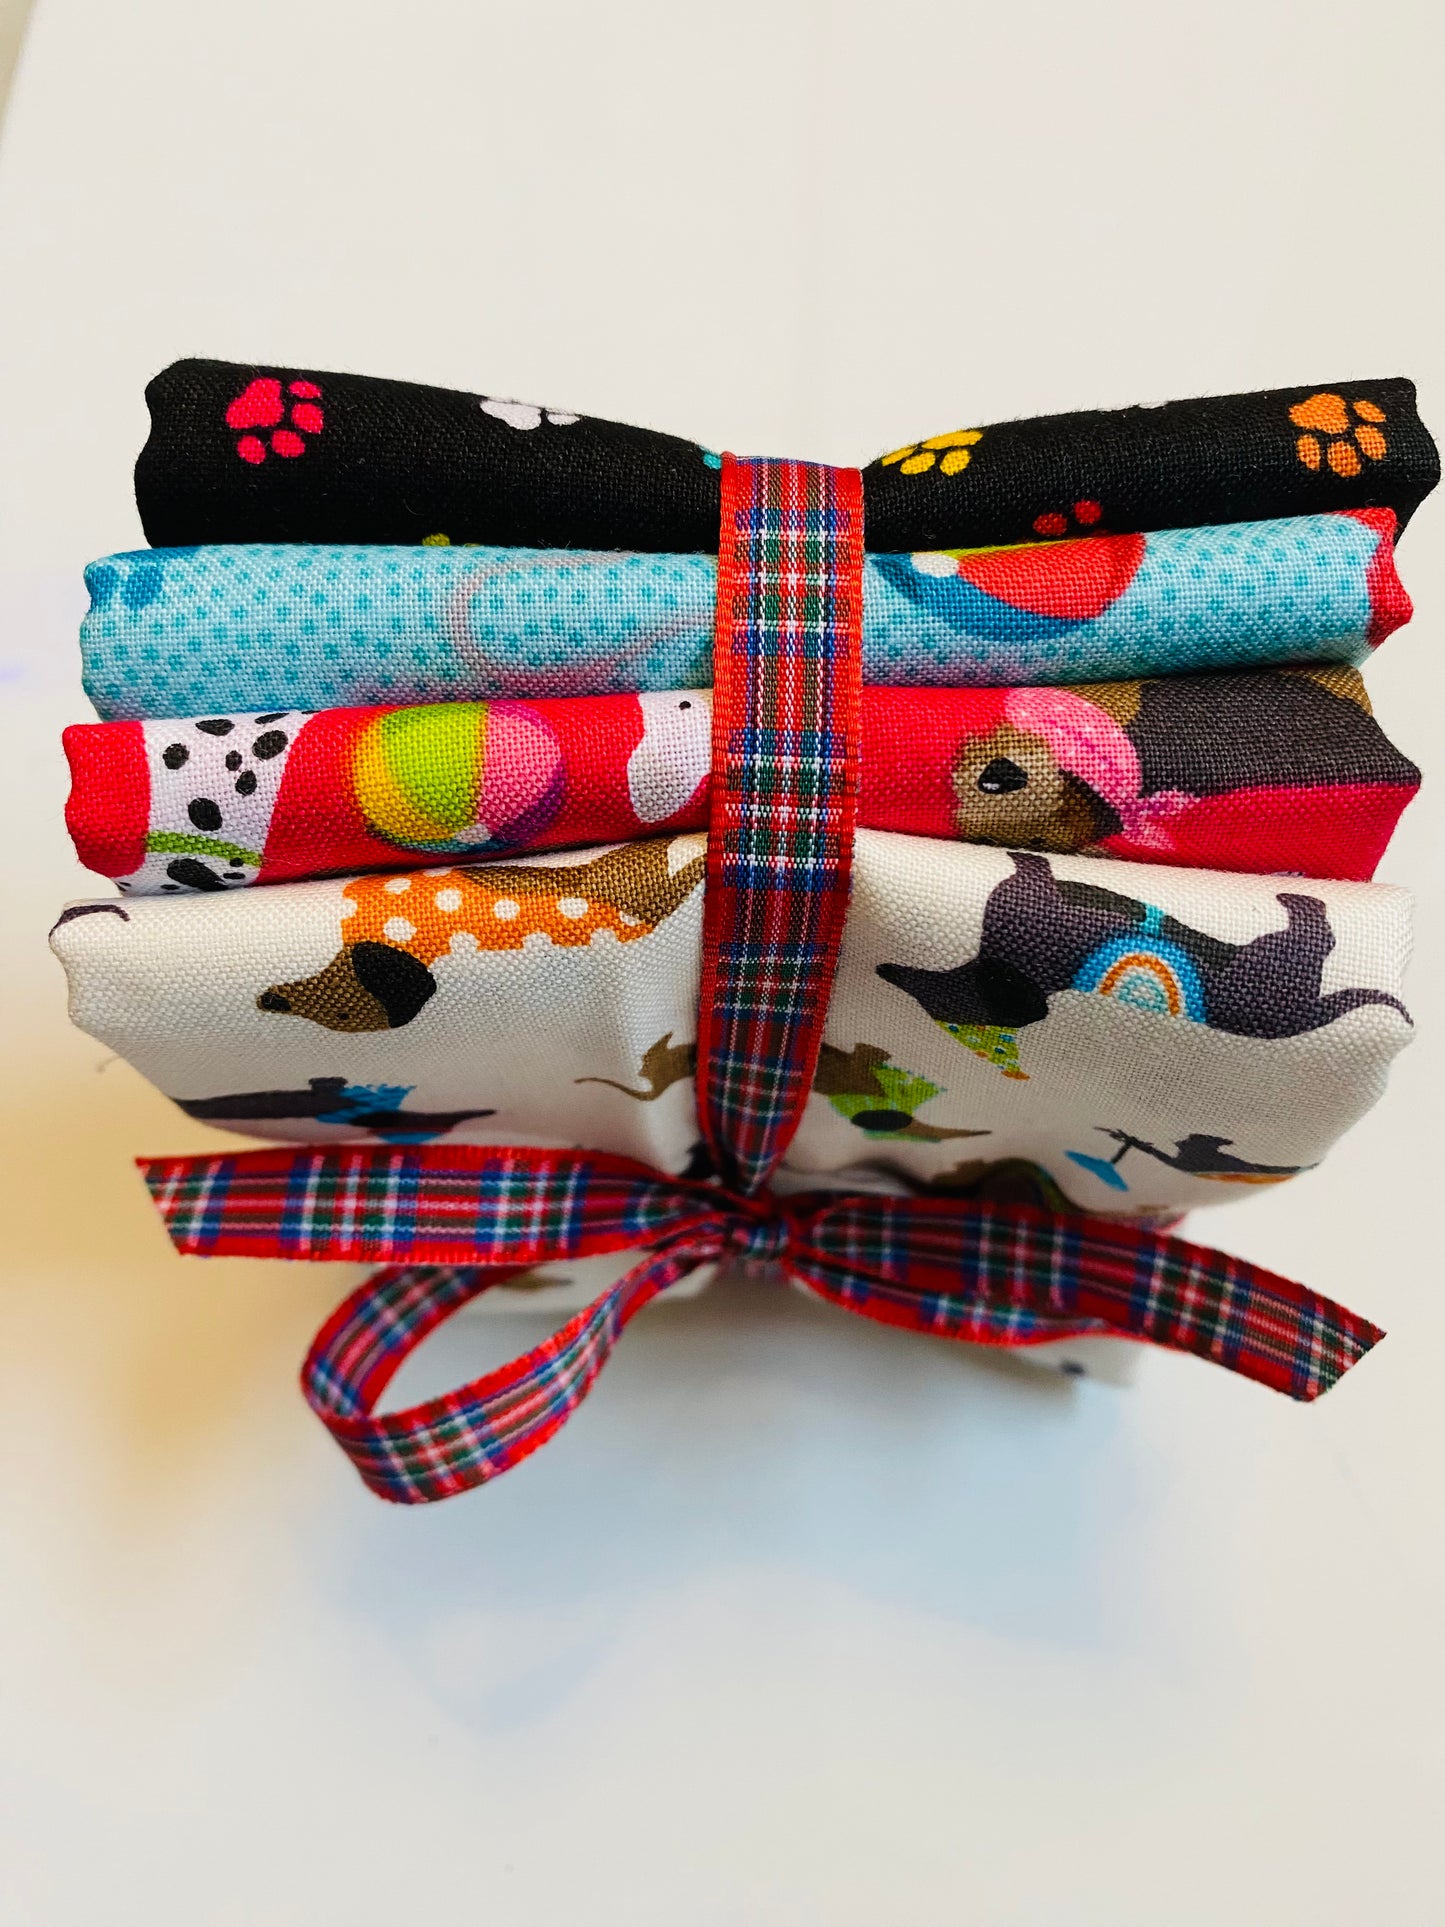 Dog & Puppy Fabric Fat Quarter Bundle - for appliqué, pillows, bags, cushions and quilts